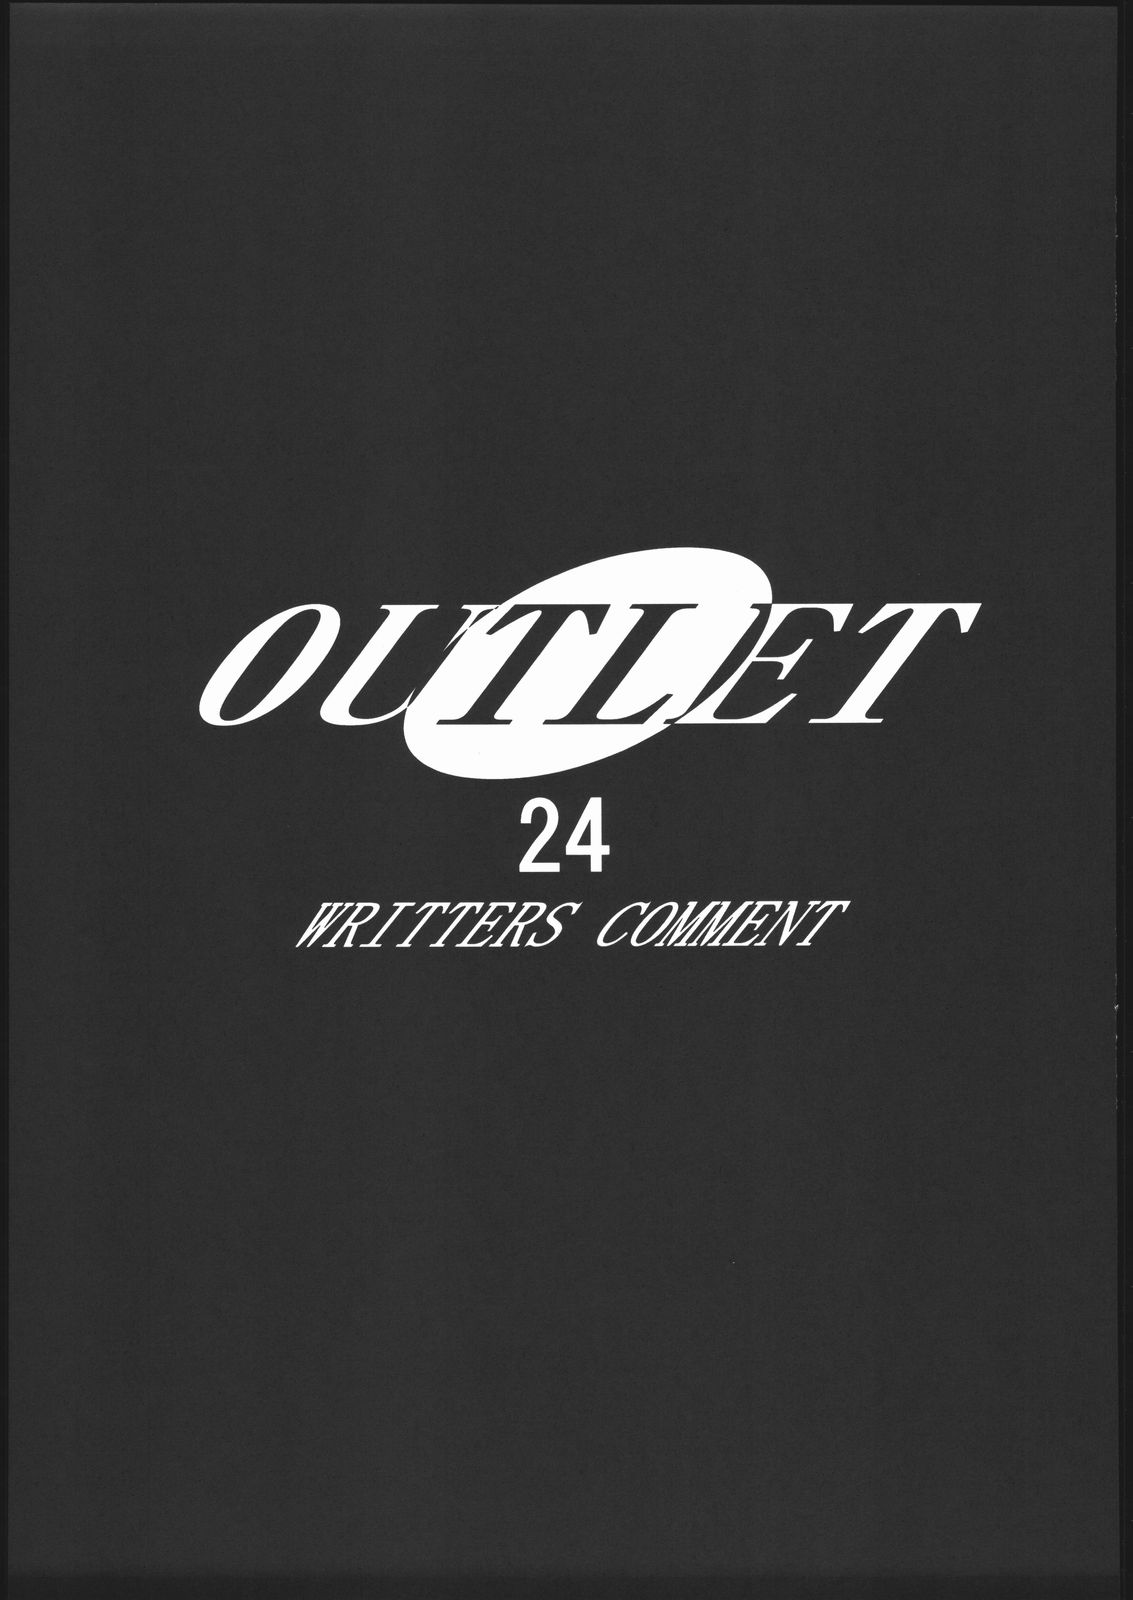 (C69) [ST.DIFFERENT (よろず)] OUTLET 24 (舞-乙HiME)